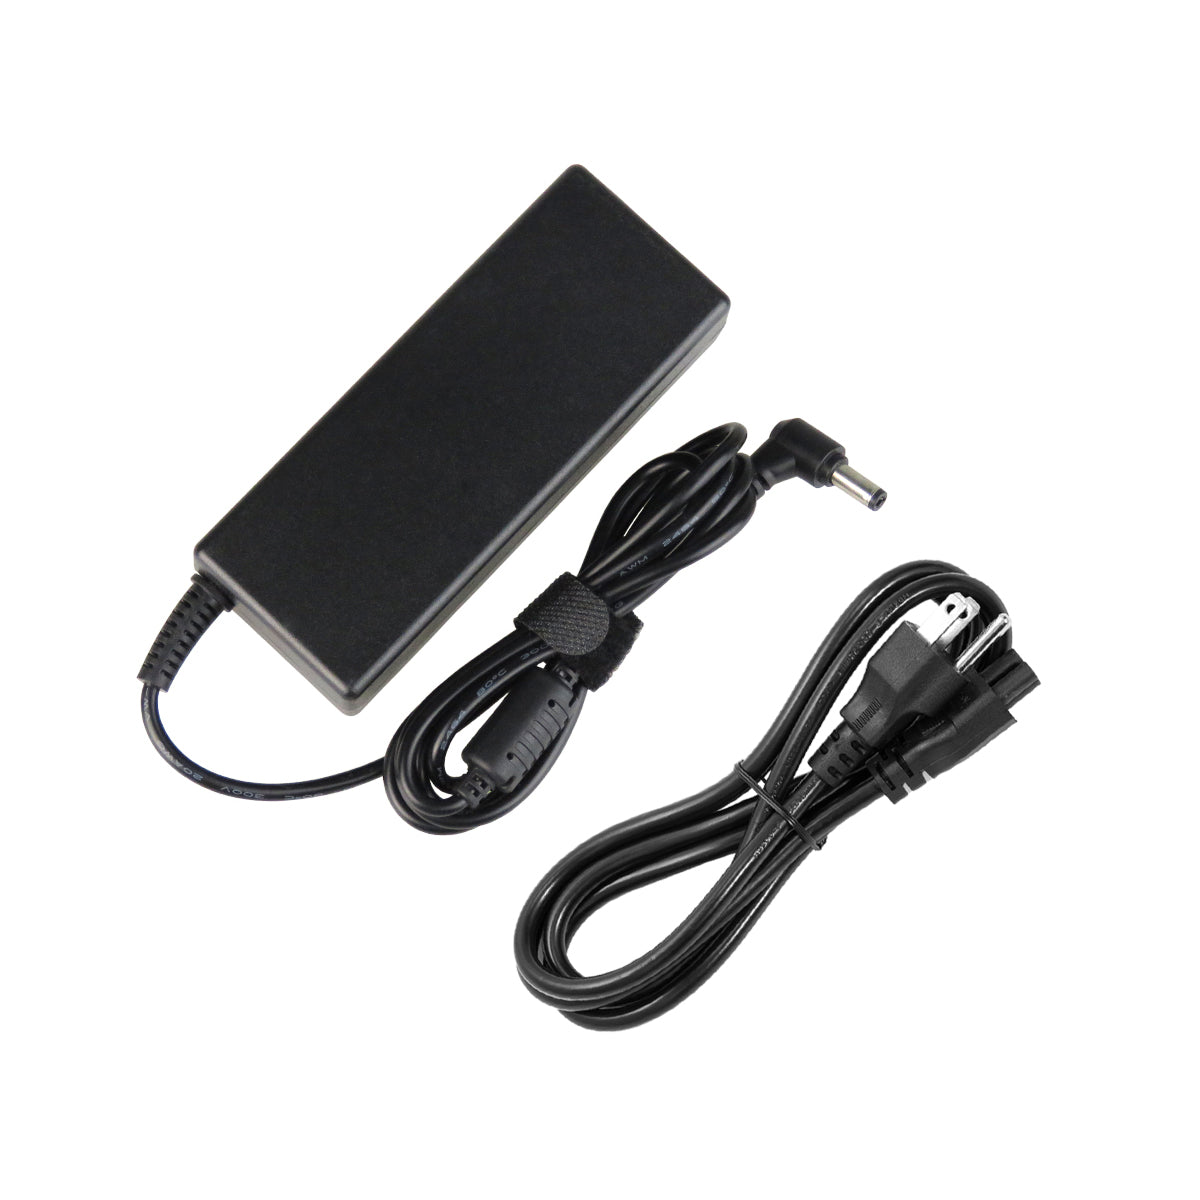 AC Adapter Charger for Toshiba Satellite p50-abt3n22 Notebook.